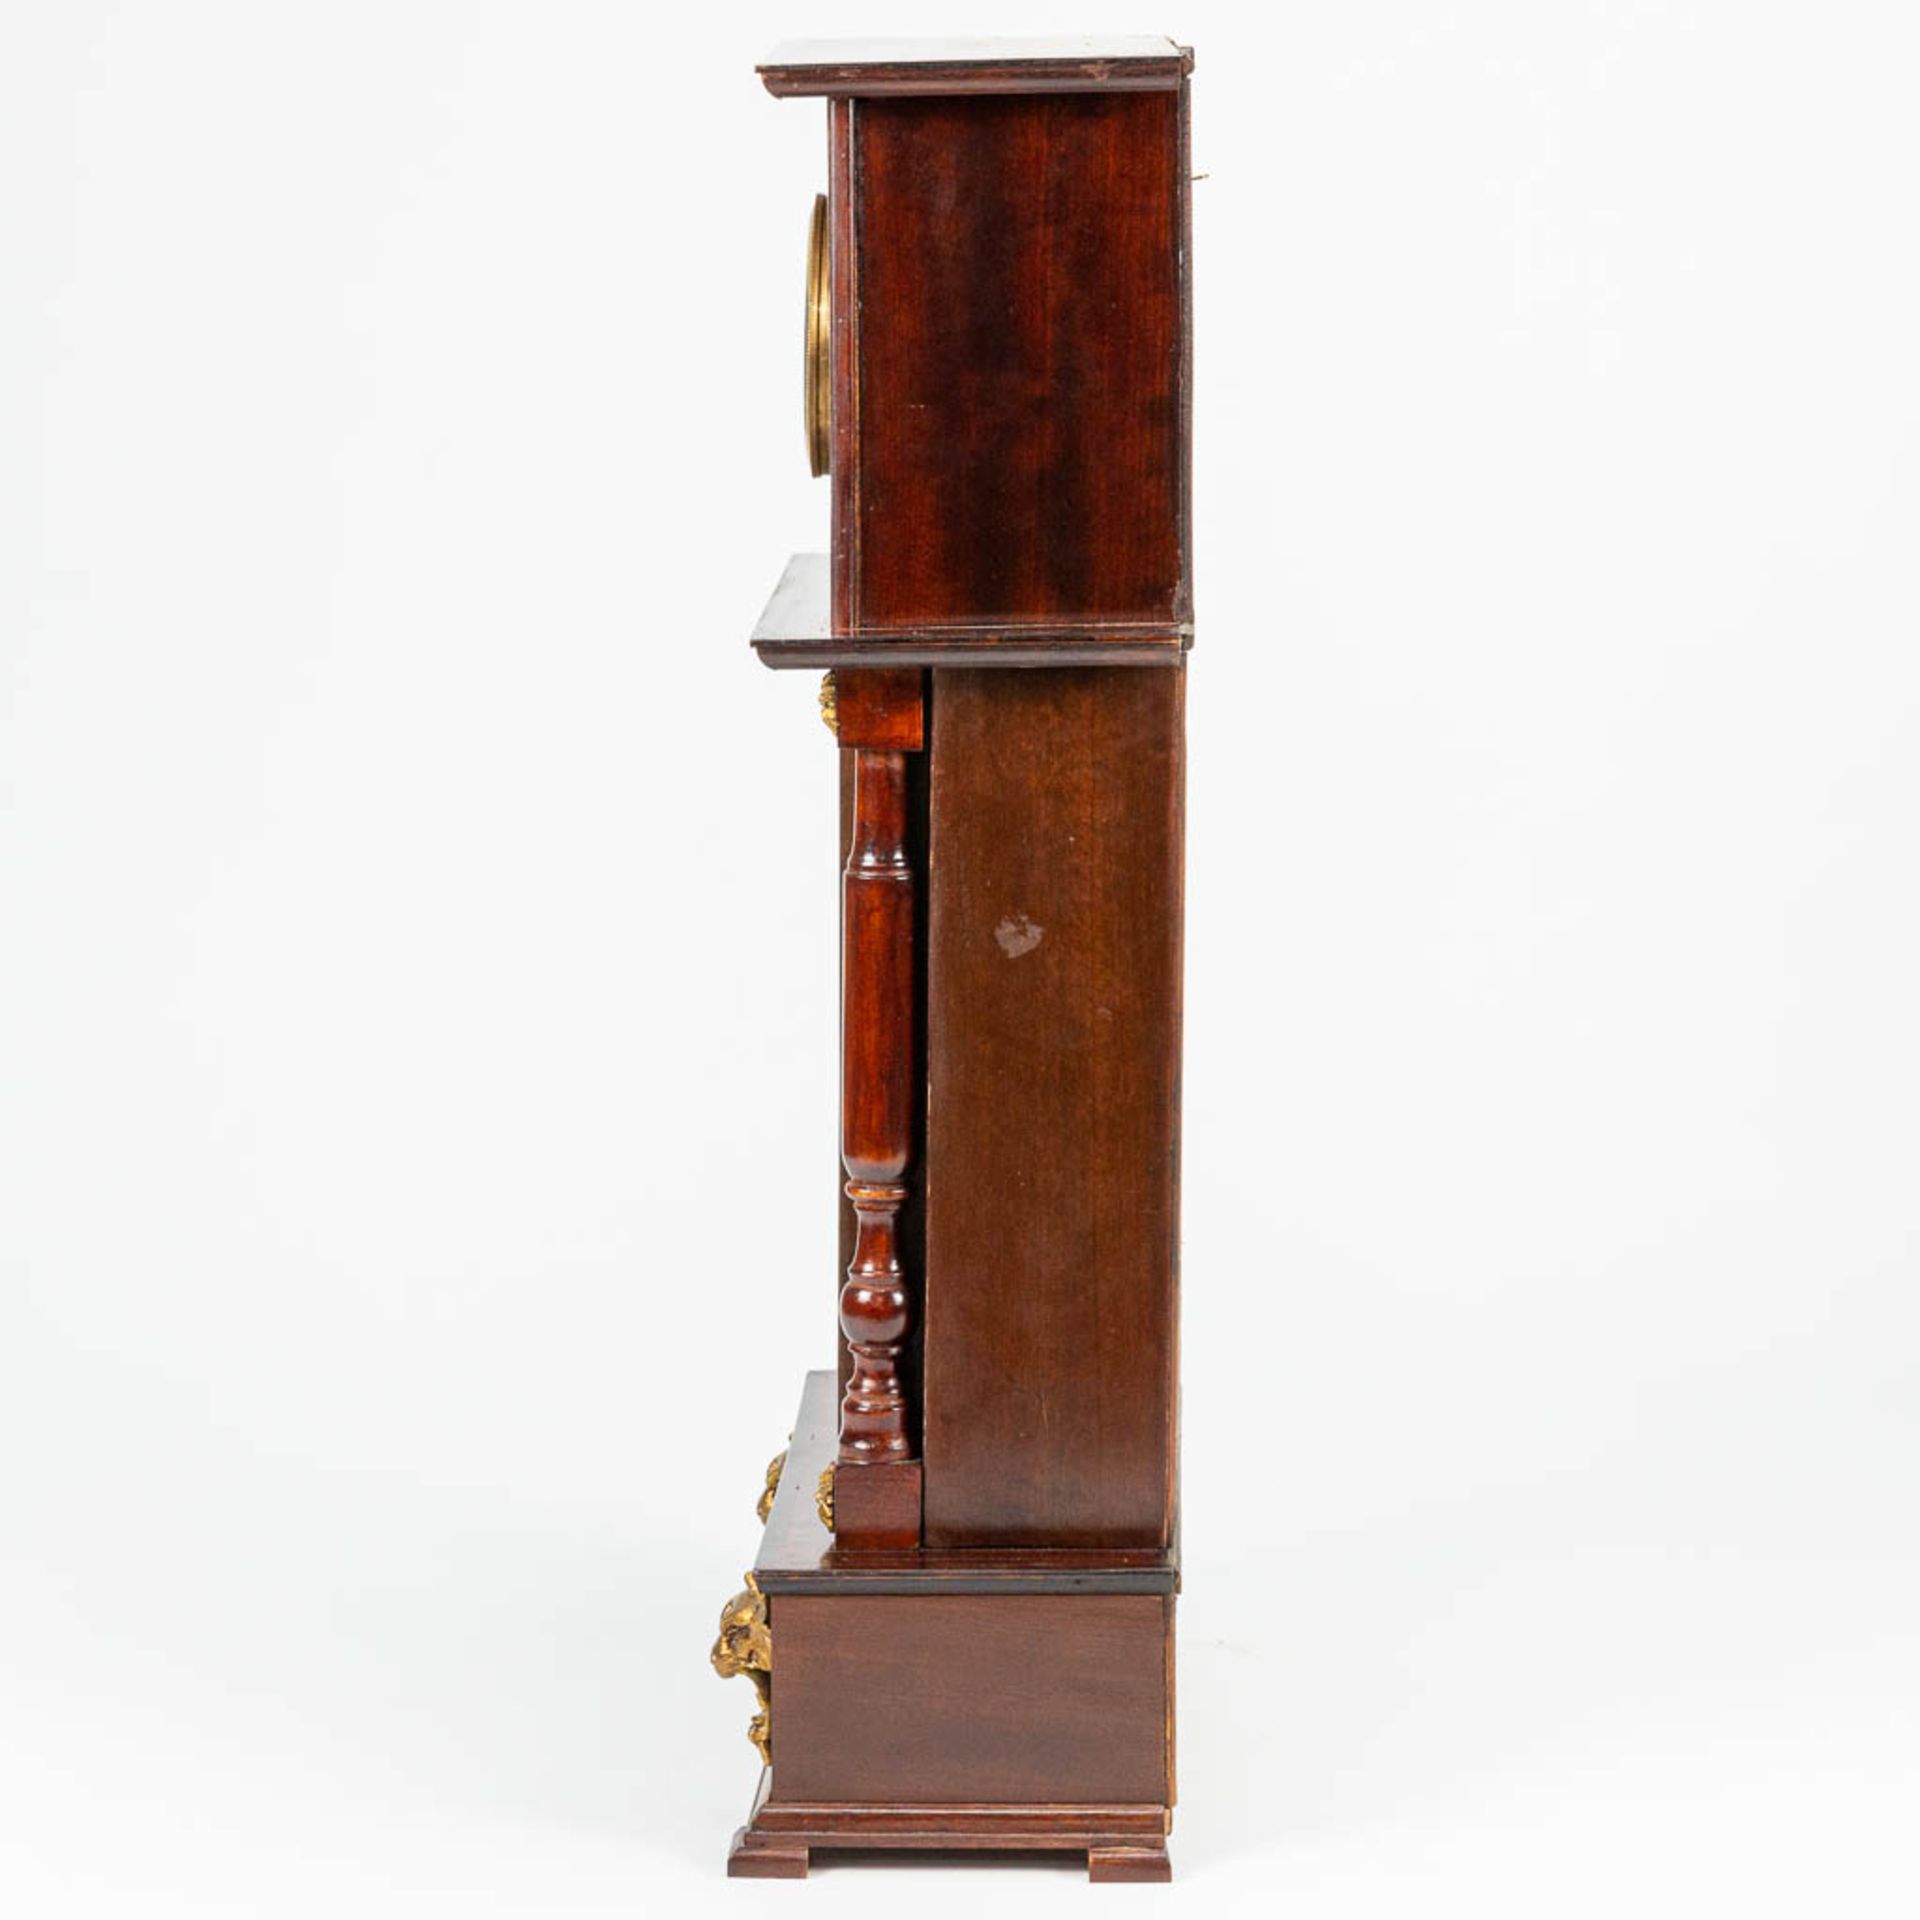 A table clock made of marquetry inlay, 19th century clock in a 20th century case. (17,5 x 34 x 73 cm - Image 5 of 16